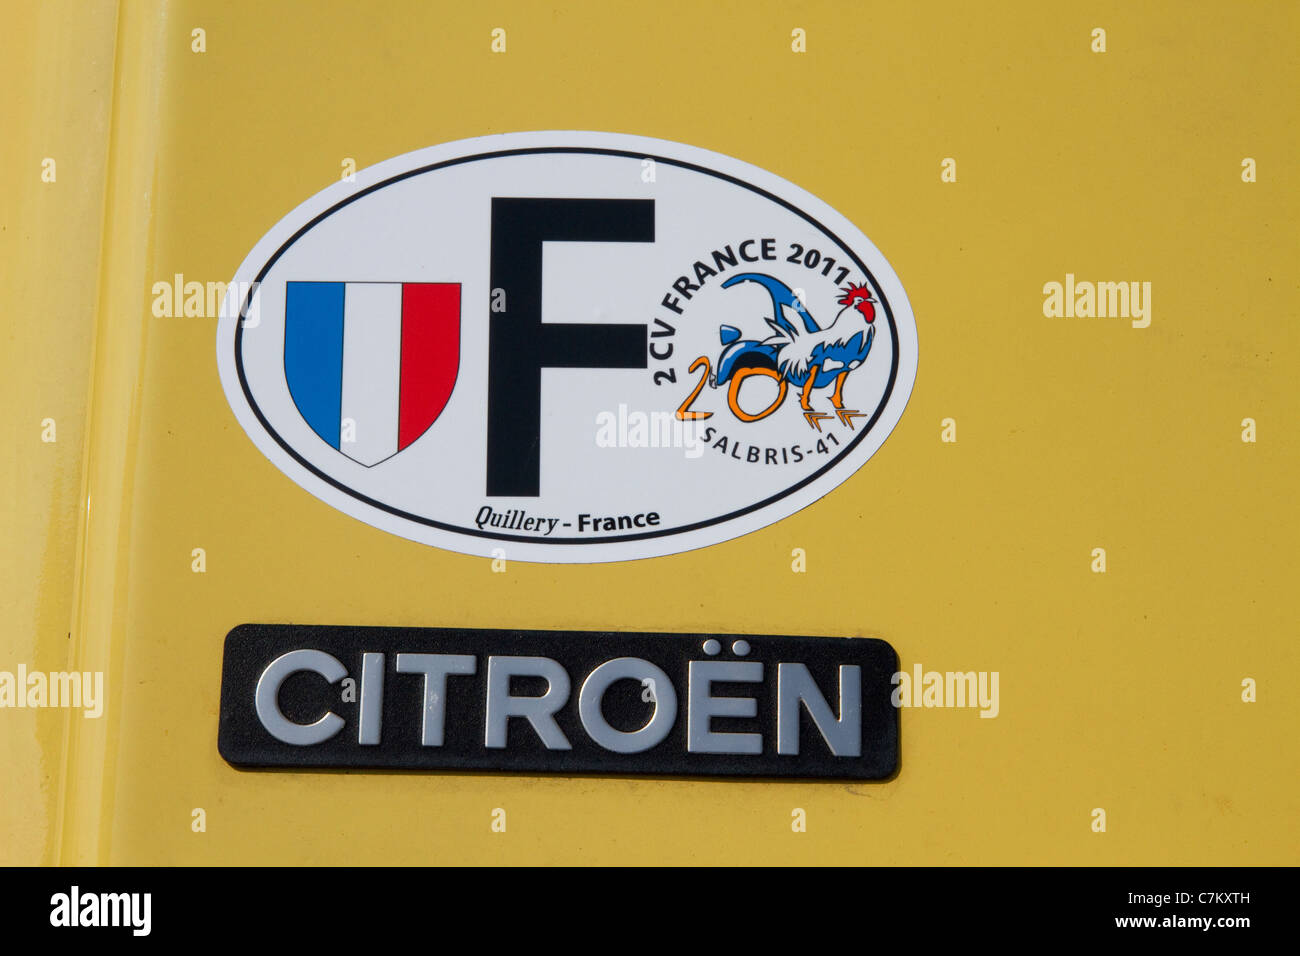 Identity badge on a 2CV Citroen seen at a rally in France Stock Photo